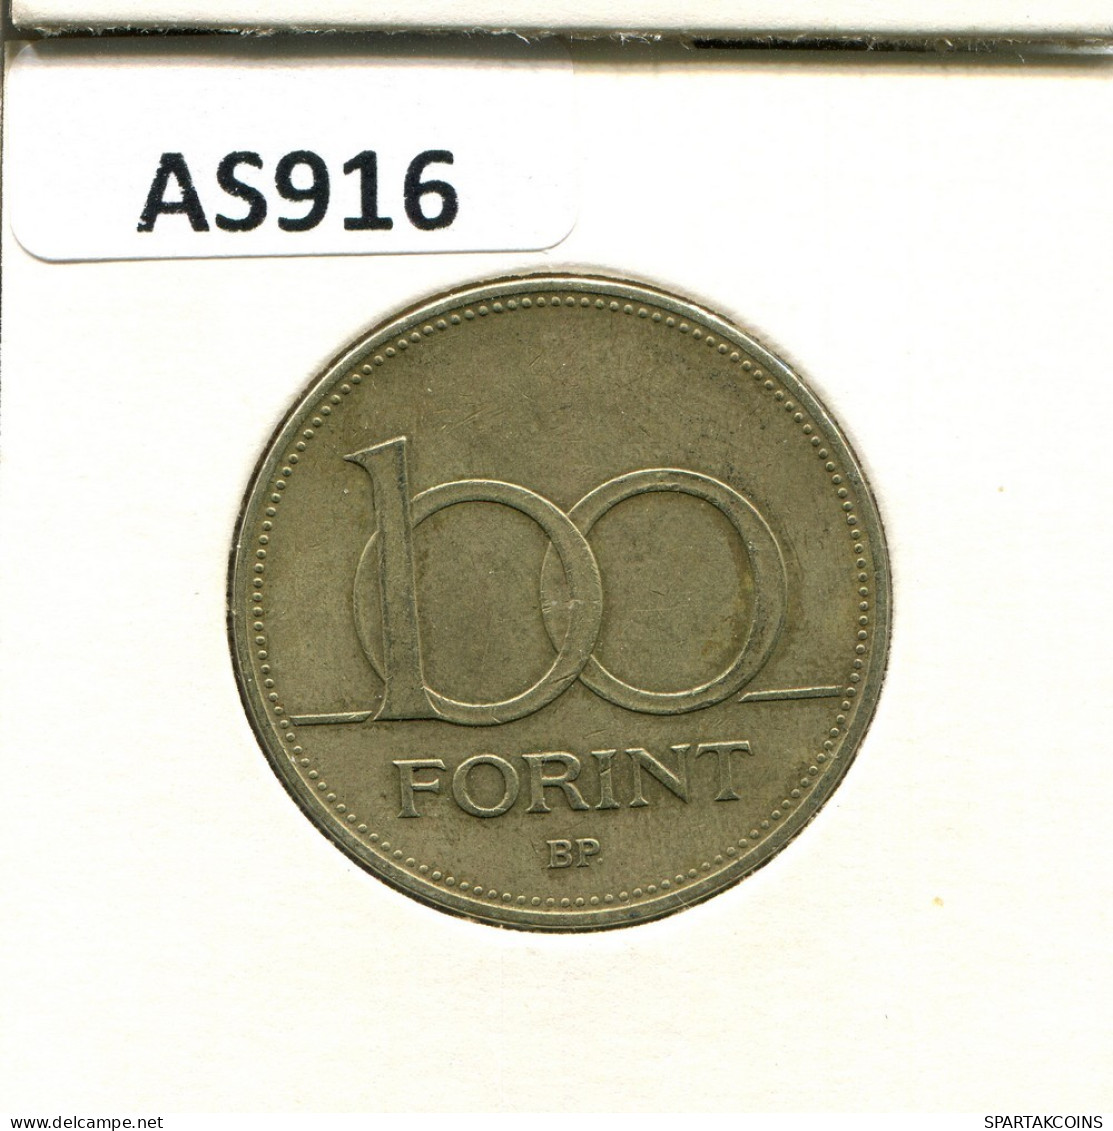 100 FORINT 1996 HUNGARY Coin #AS916.U.A - Ungheria